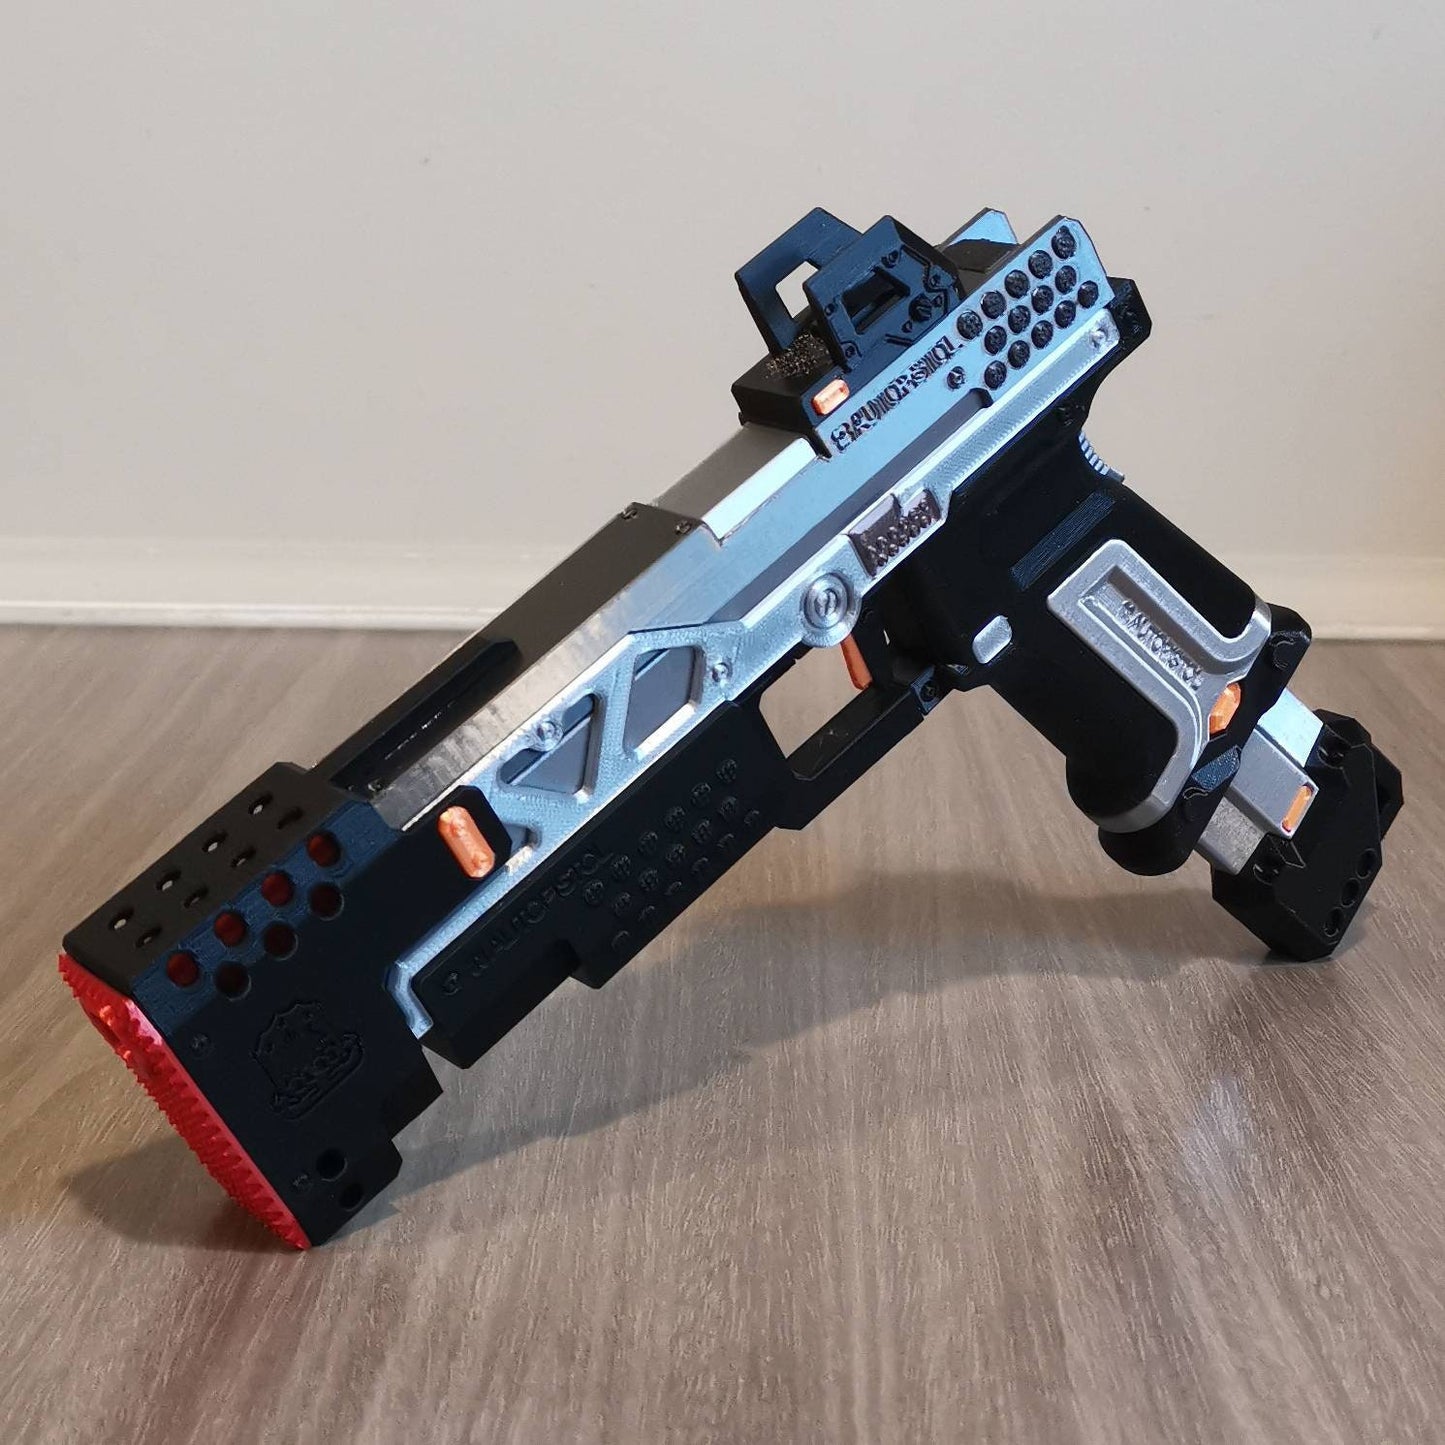 Apex Legends RE-45 Cosplay Replica With Stand, Wingman replica, Post Apocalyptic Larp Weapon, Cyberpunk Cosplay Prop Weapon